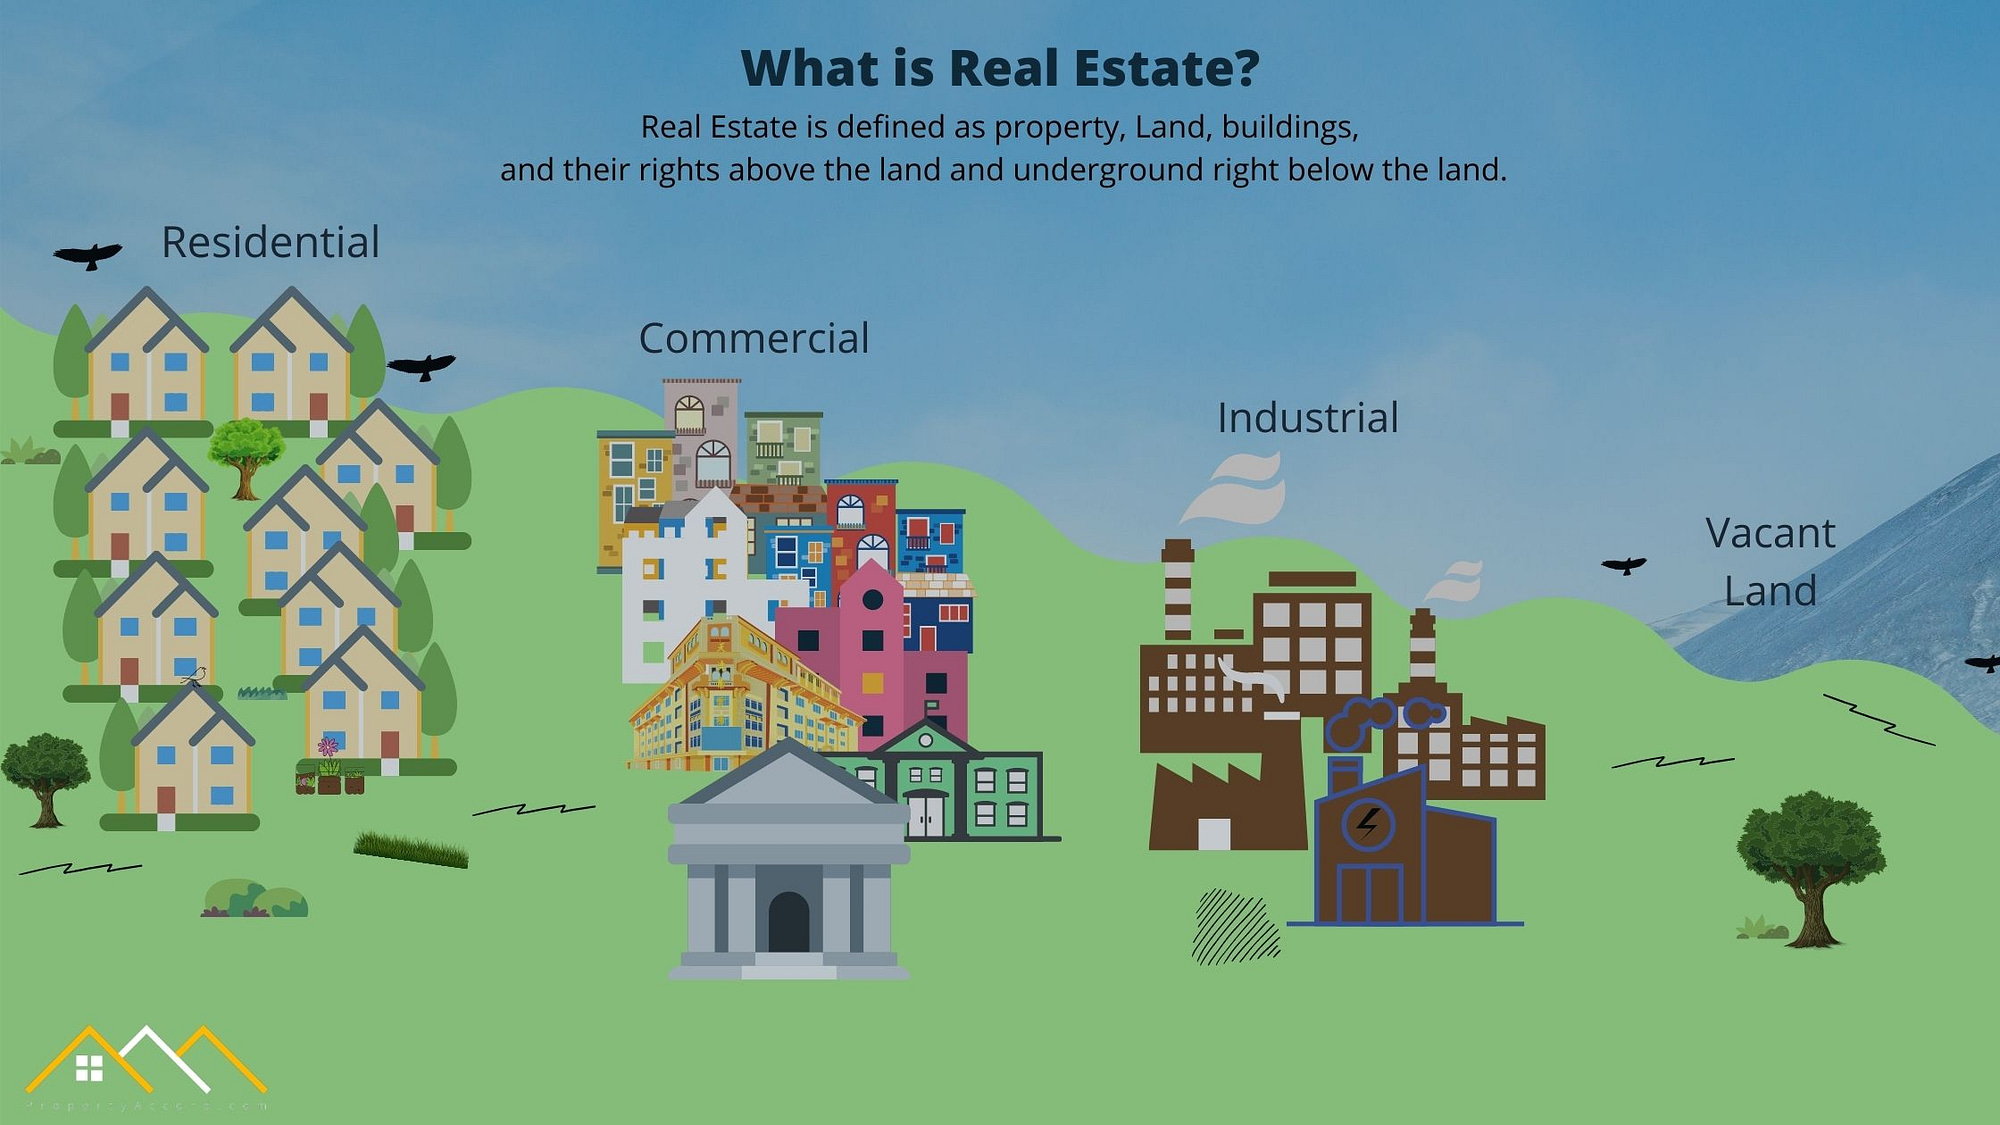 What are the 4 types of Real Estate?